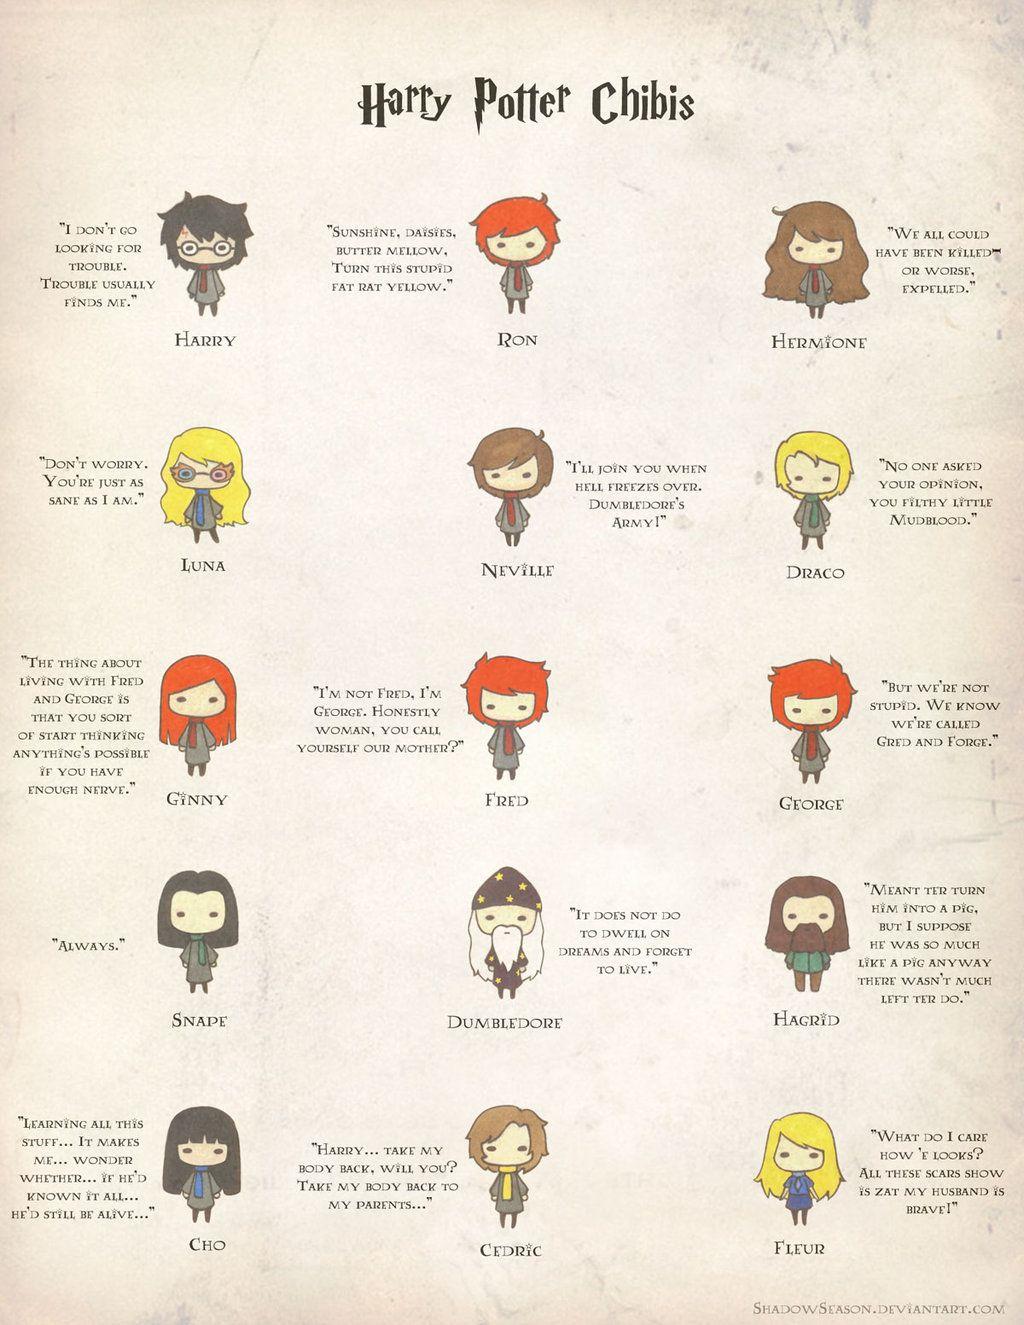 Harry Potter characters and iconic quotes. Harry Potter